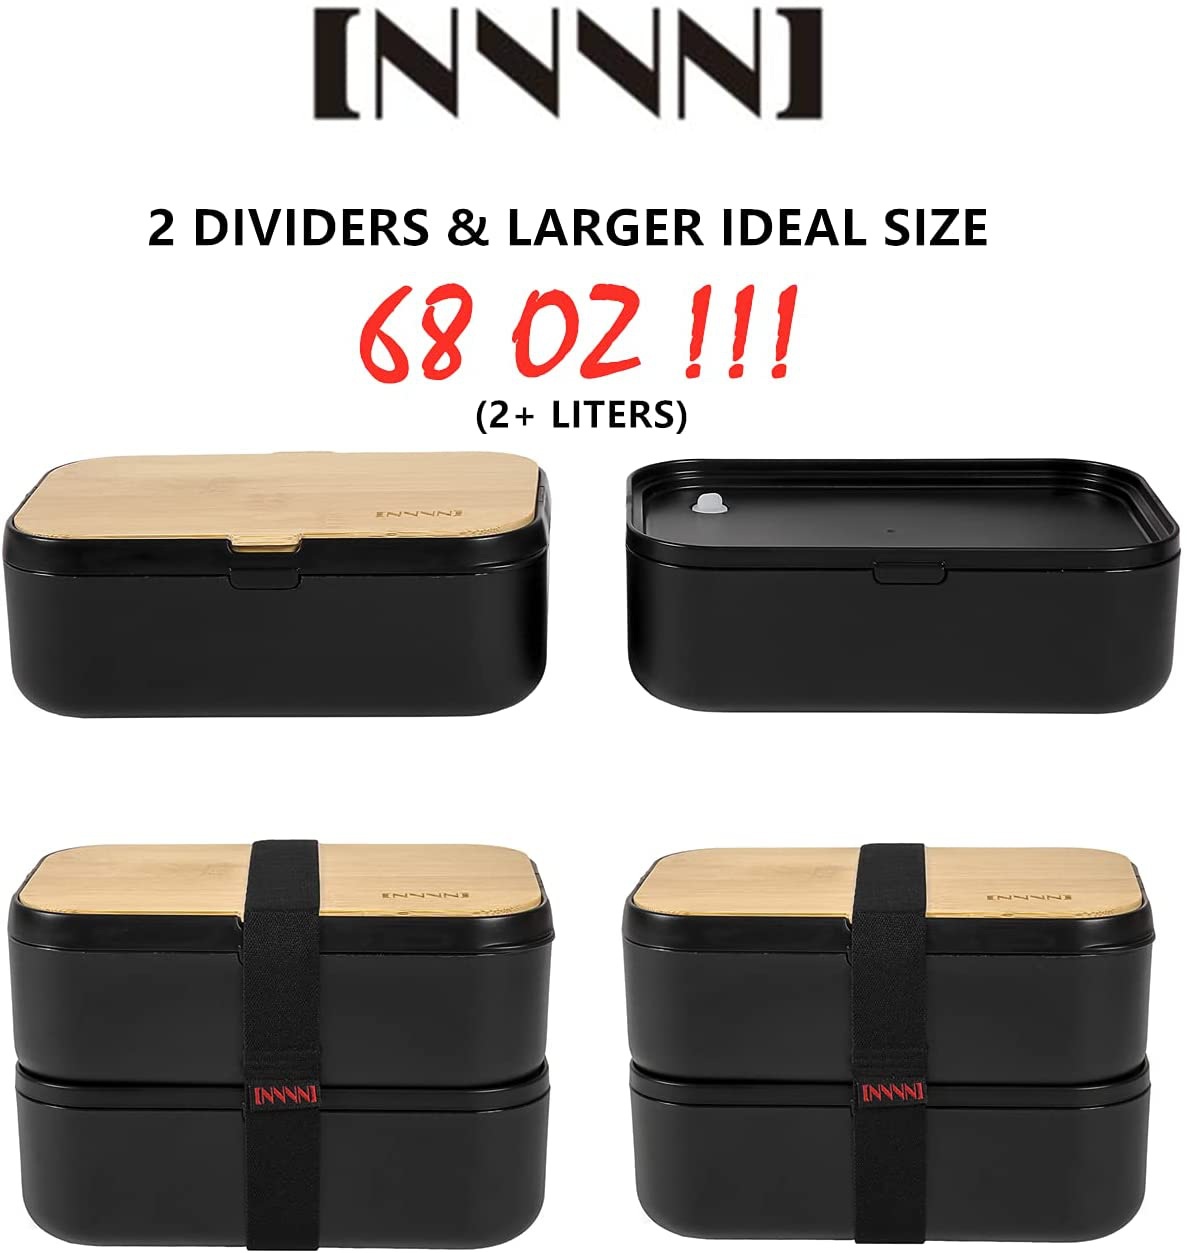 INVVNI Japanese Bento Box Adult Lunch Bamboo Containers for Kids Black (Large 68 Oz Capacity)- Microwave safe, Bpa free, Leakproof, Men Women